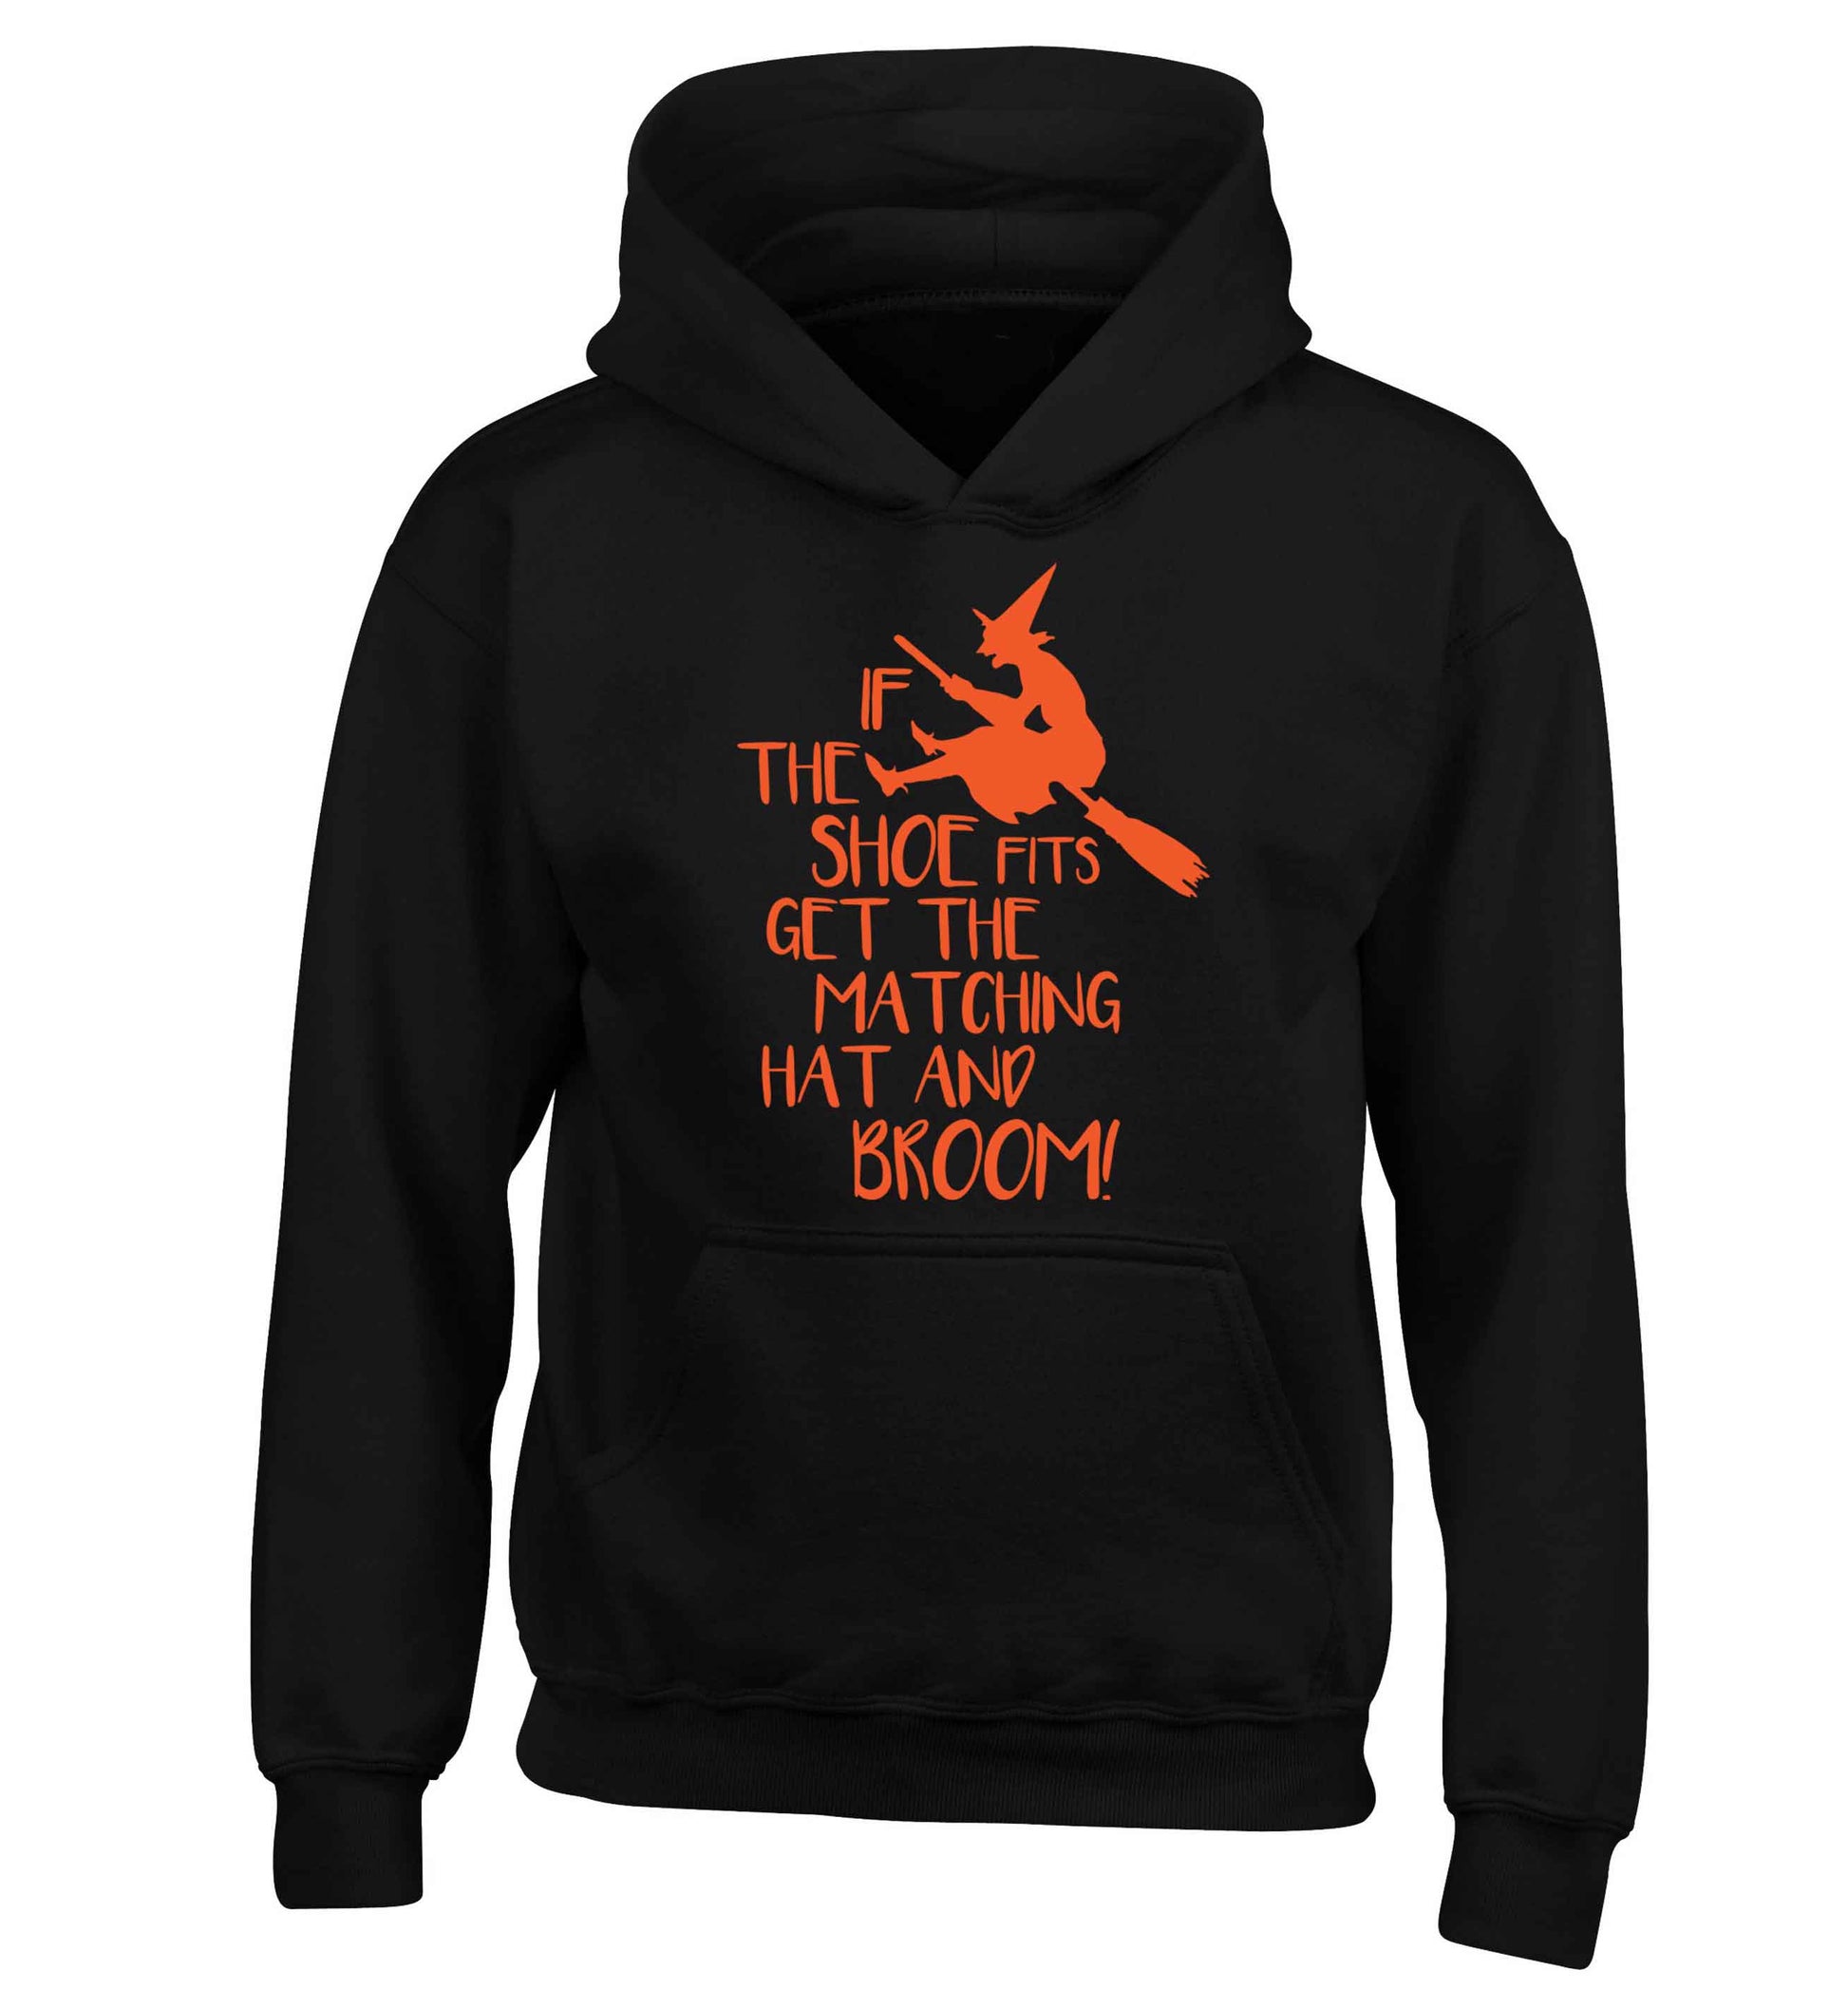 If the shoe fits get the matching hat and broom children's black hoodie 12-13 Years